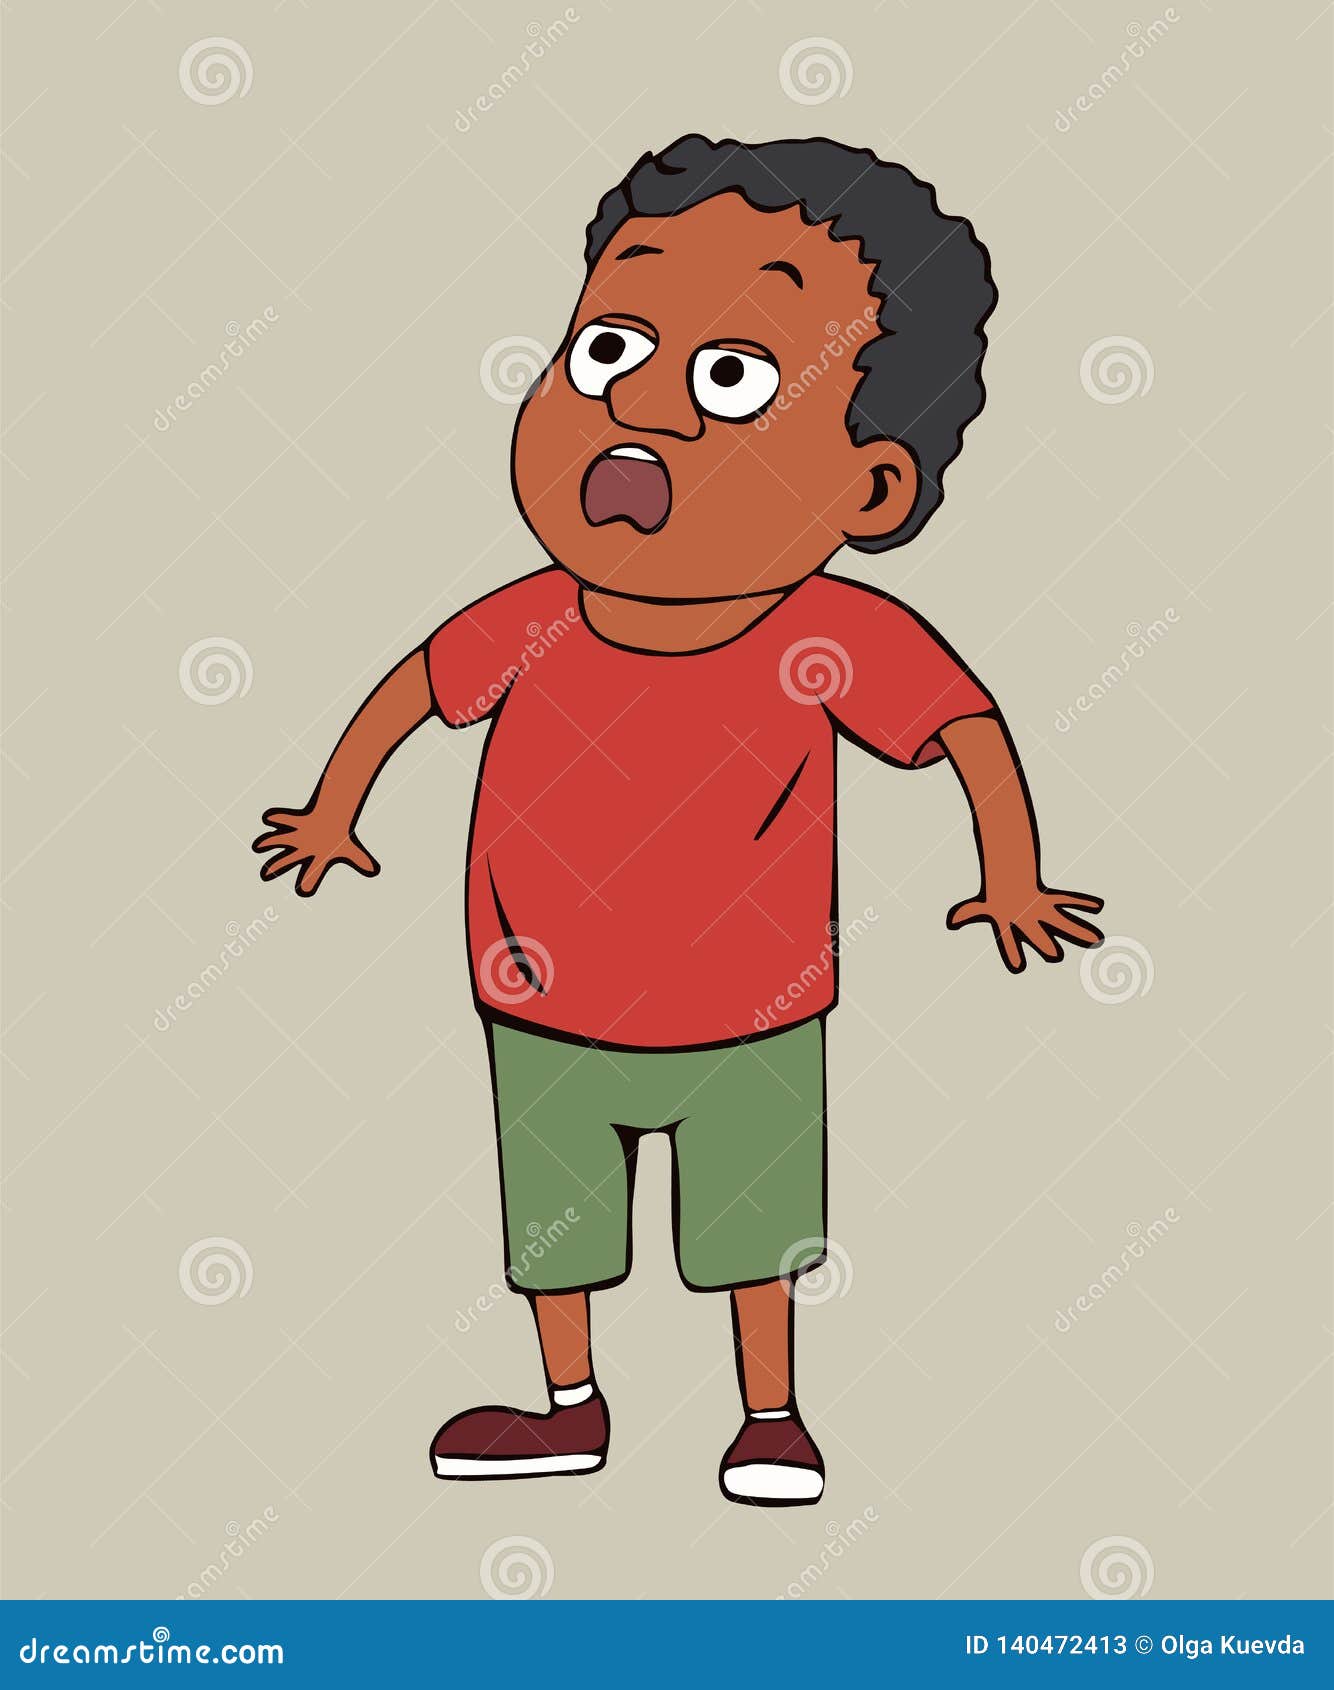 https://thumbs.dreamstime.com/z/cartoon-portrait-surprised-kid-open-mouth-funny-vector-character-isolated-outlined-140472413.jpg